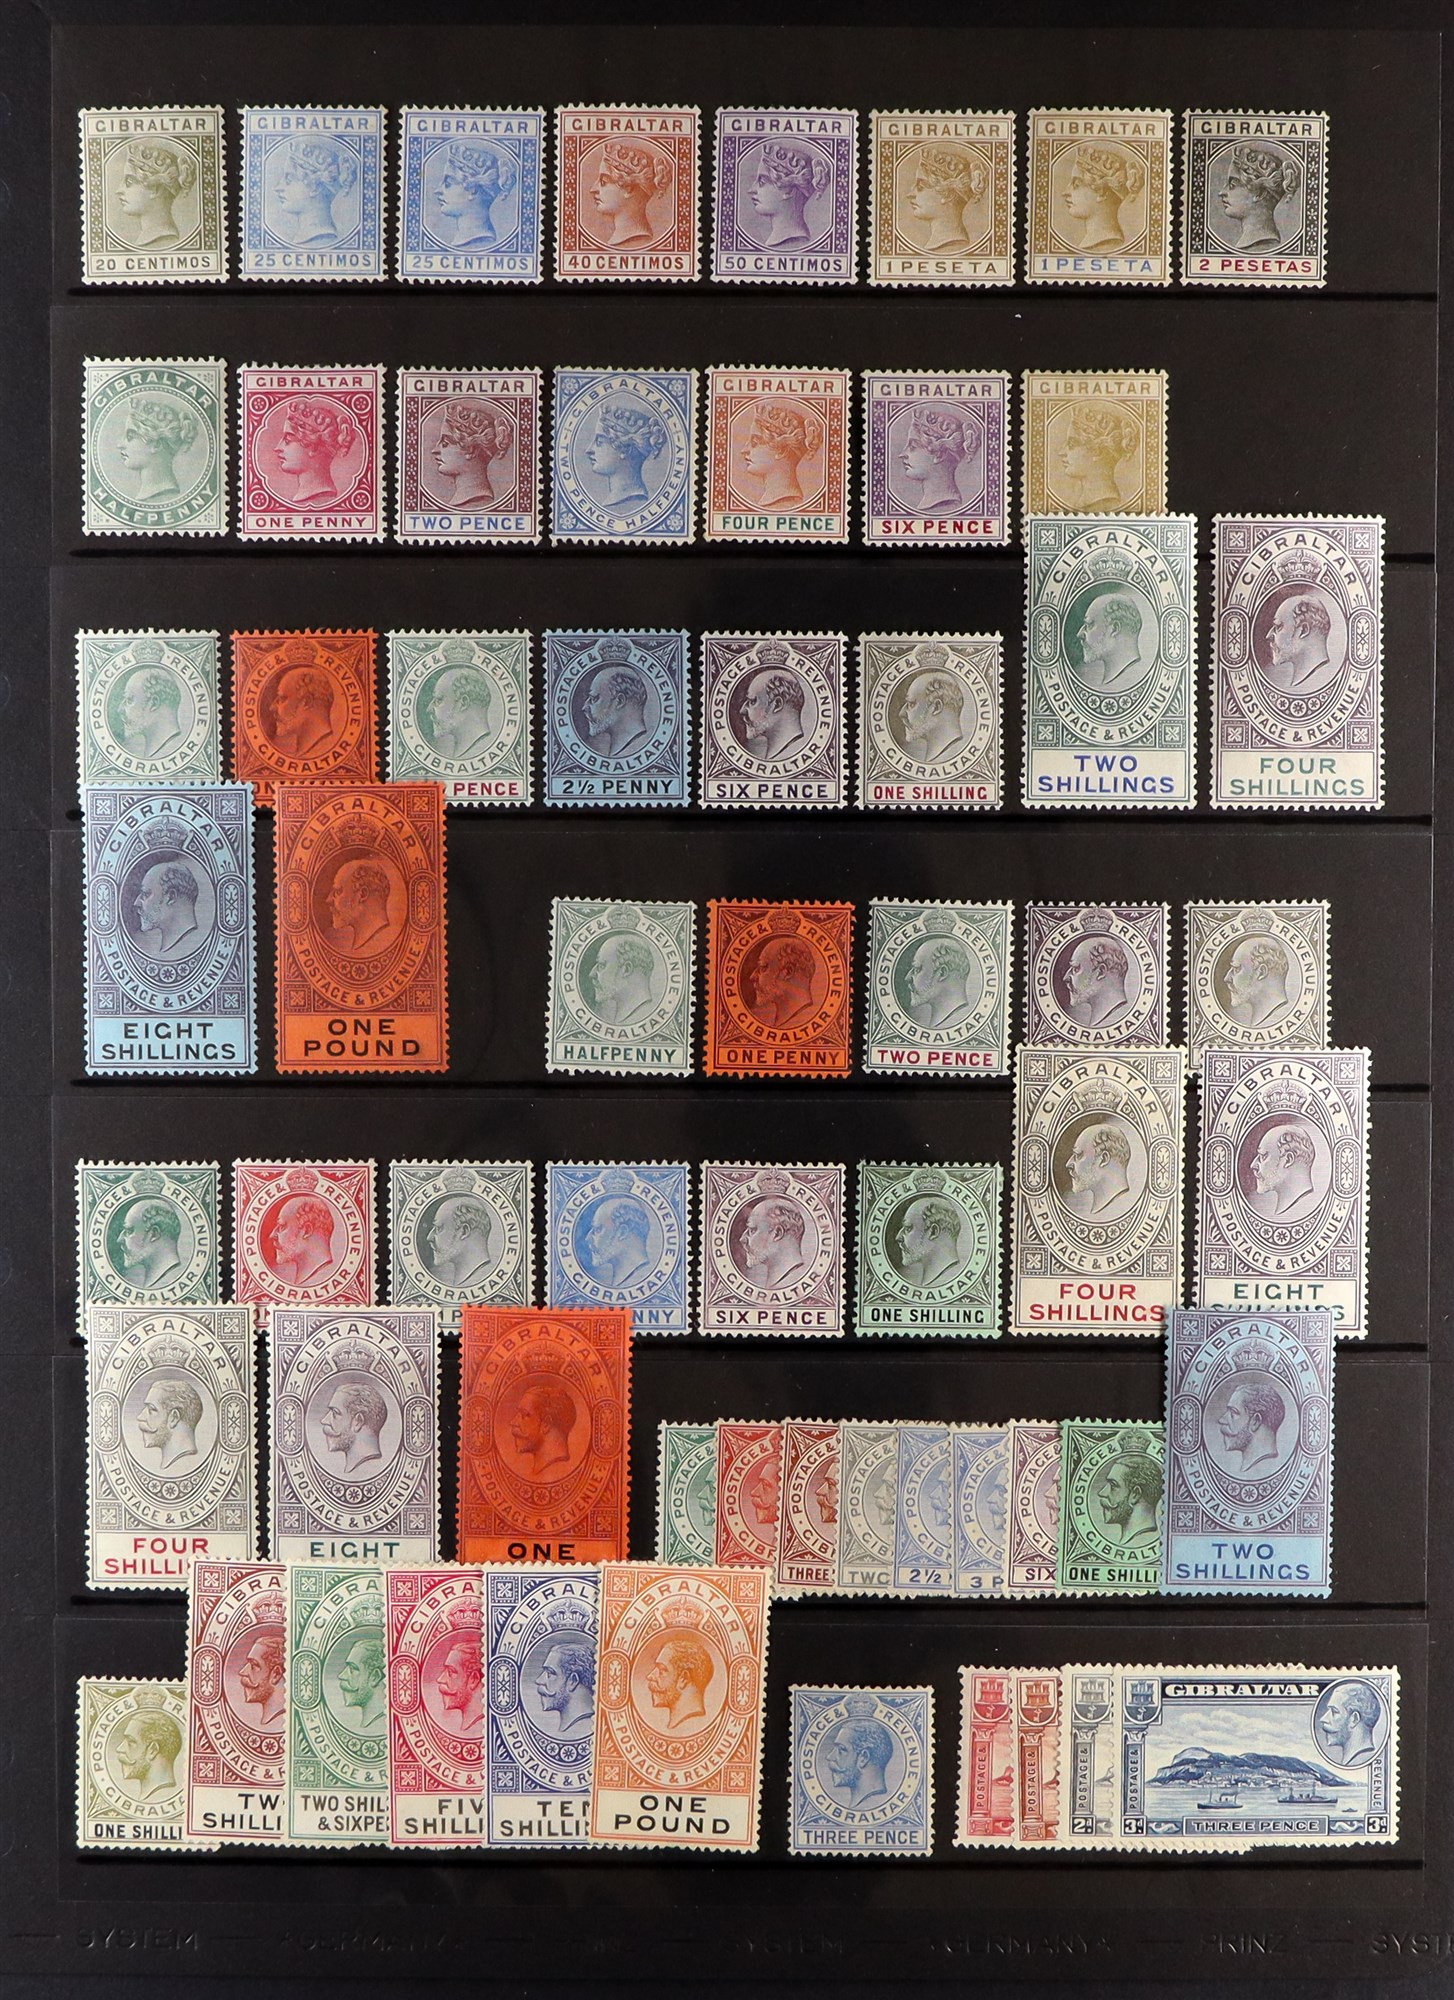 GIBRALTAR 1889 - 1931 VALUABLE MINT COLLECTION incl. 1889-96 range to 2p incl. 1p bistre, 1898 re-